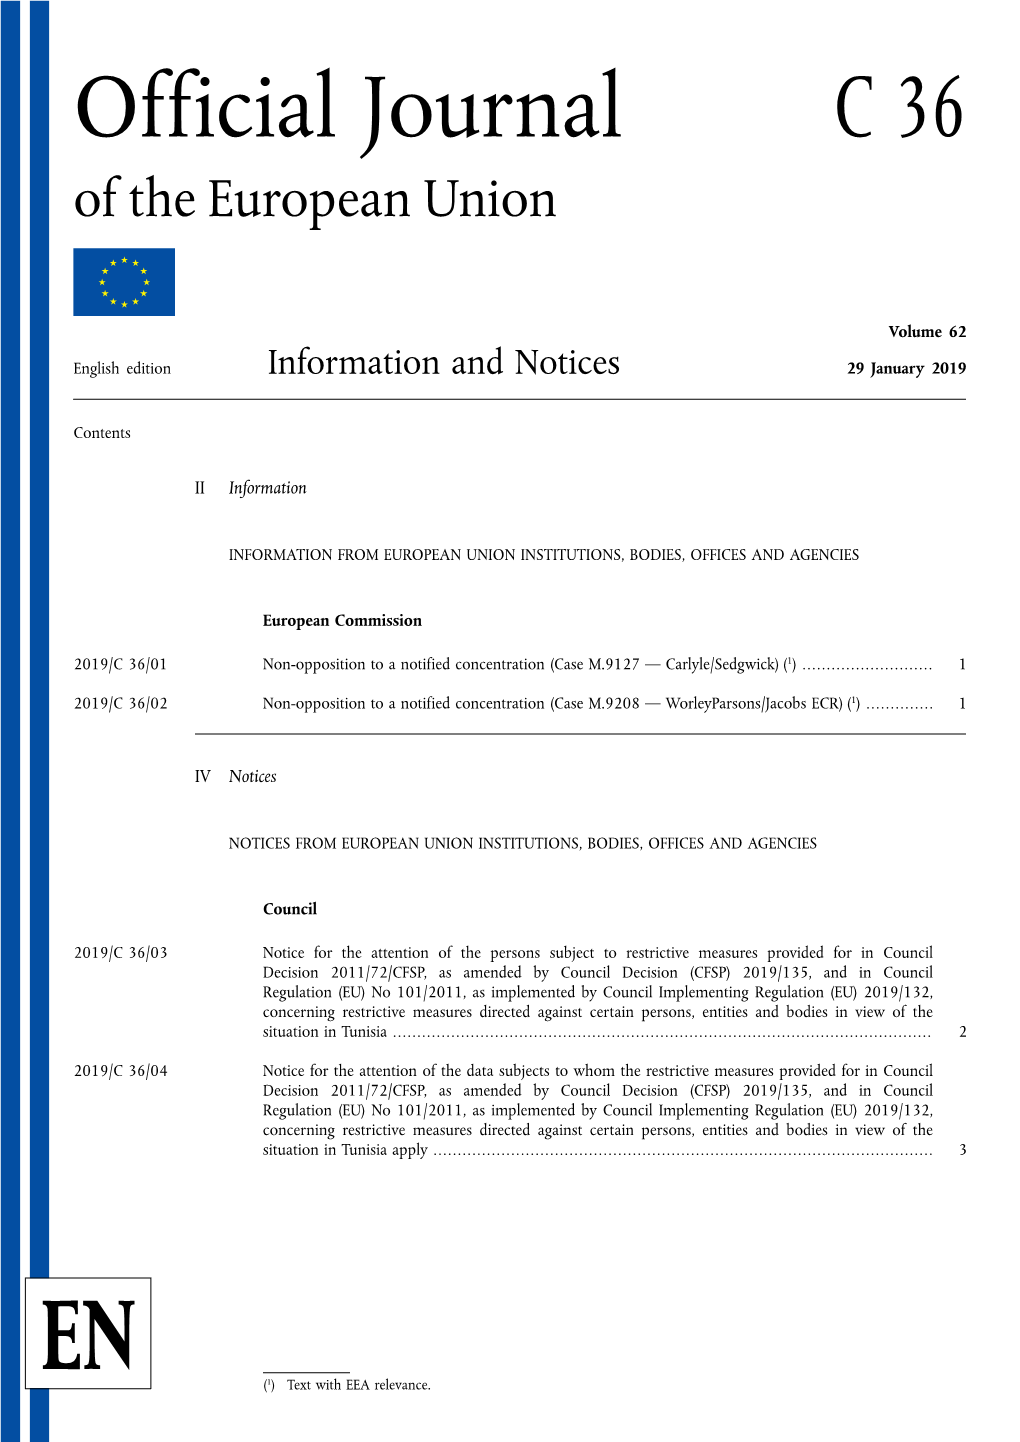 Official Journal C 36 of the European Union